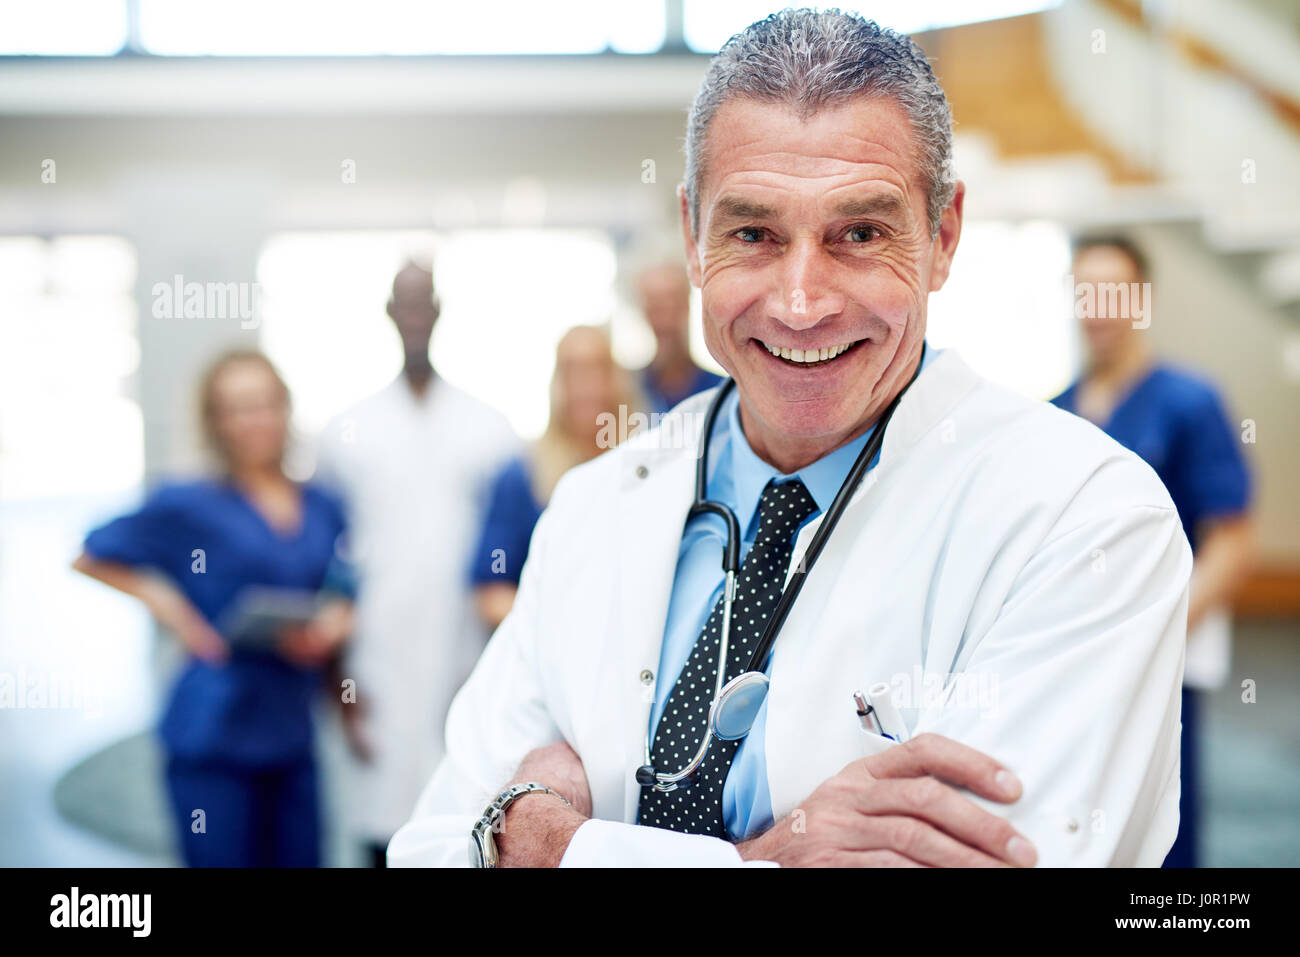 Portrait of cheerful doctor in a hospital standing with arms crossed. Stock Photo